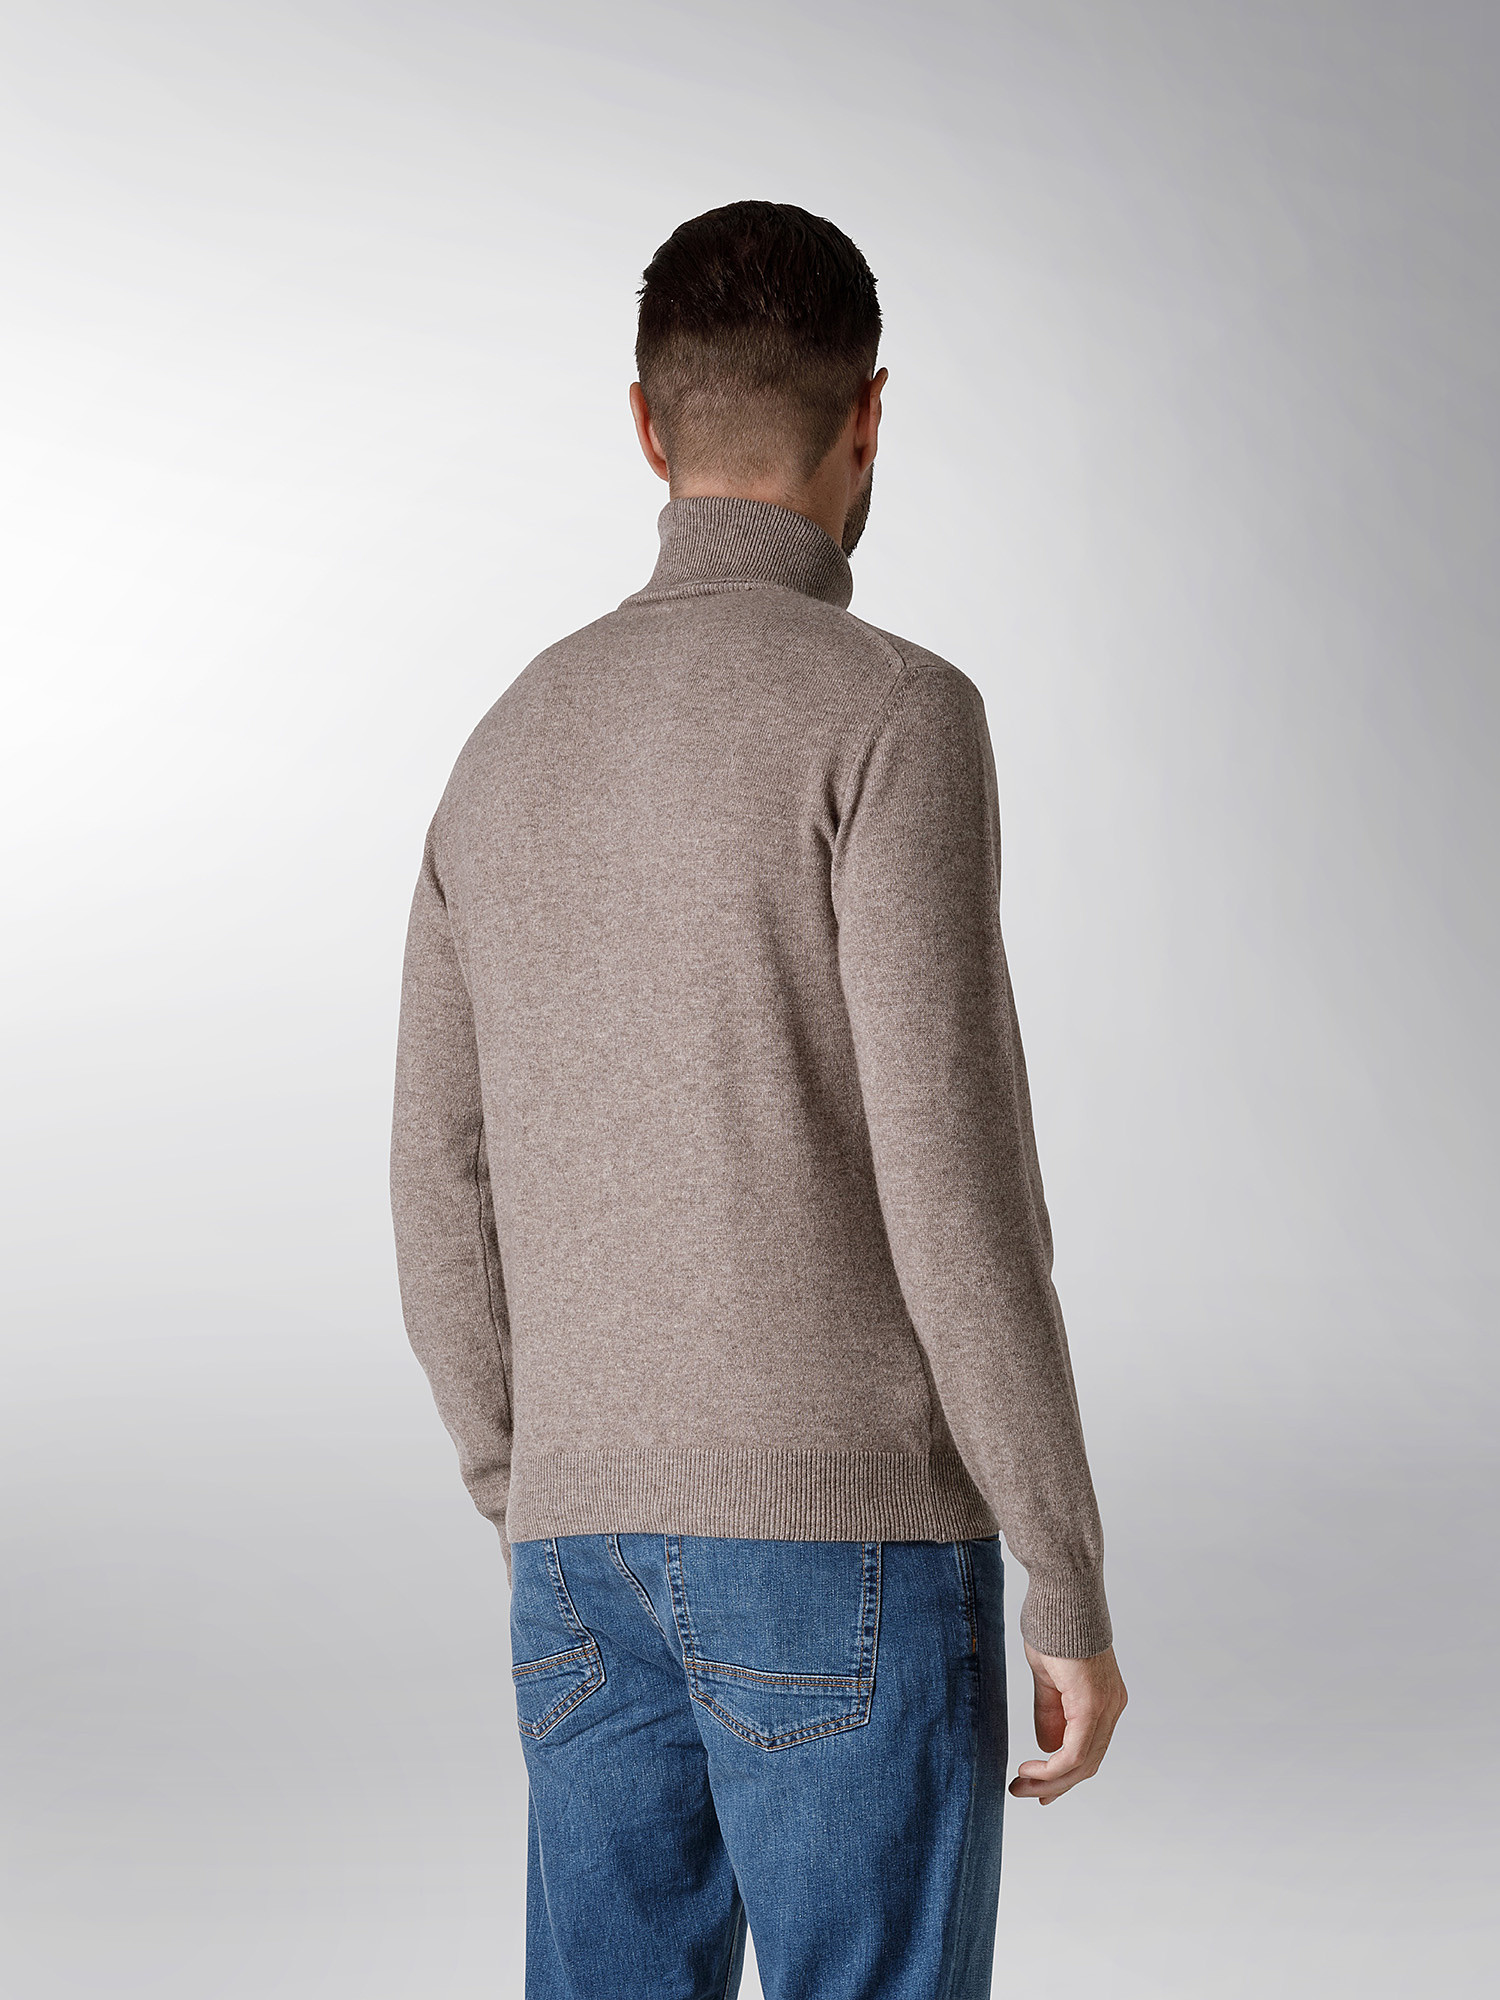 Coin Cashmere - Dolcevita in puro cashmere, Grigio taupe, large image number 2